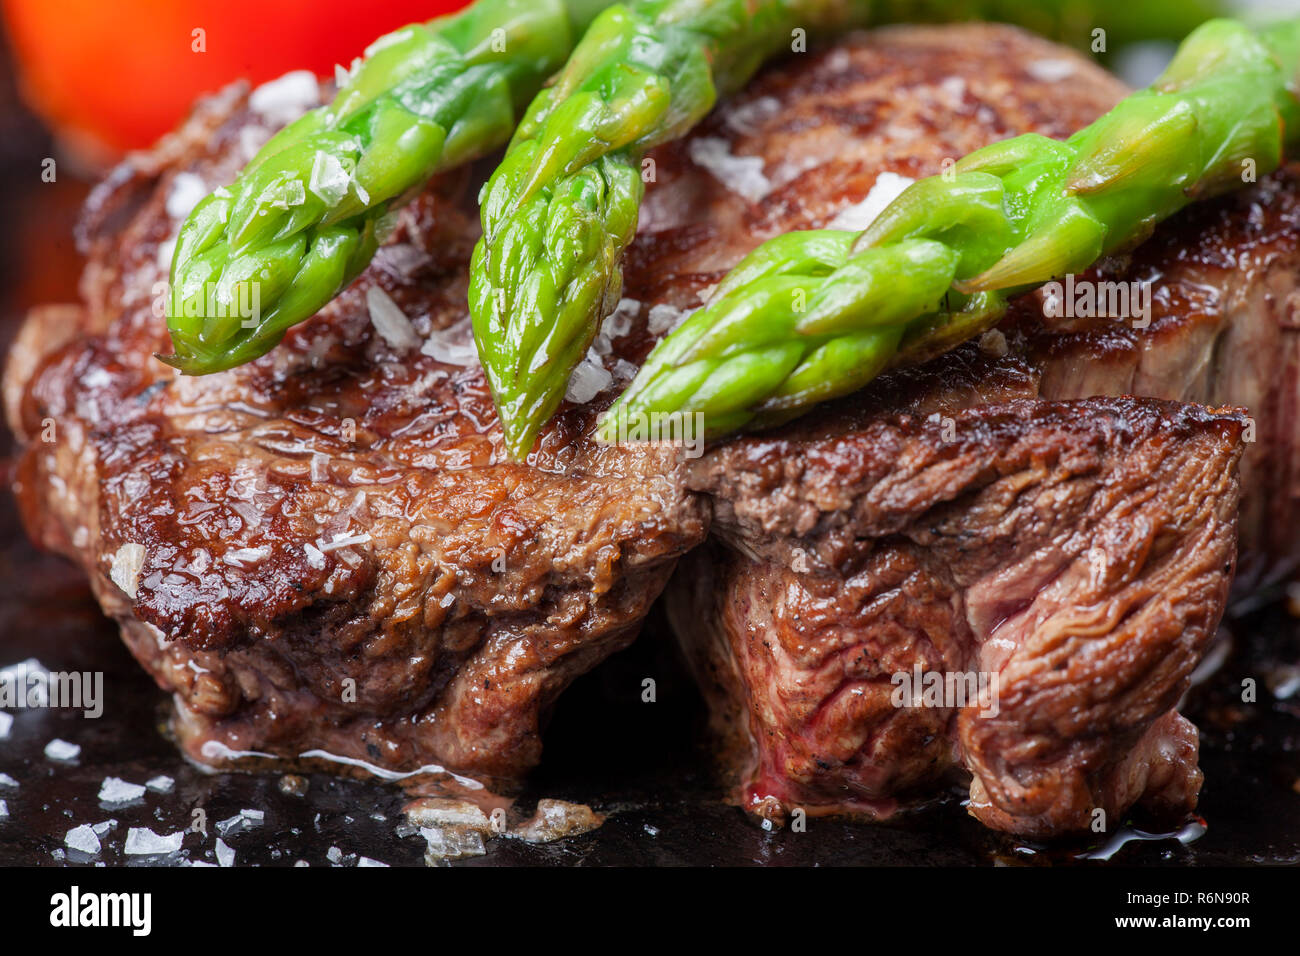 beef steak and green asparagus in a pan Stock Photo